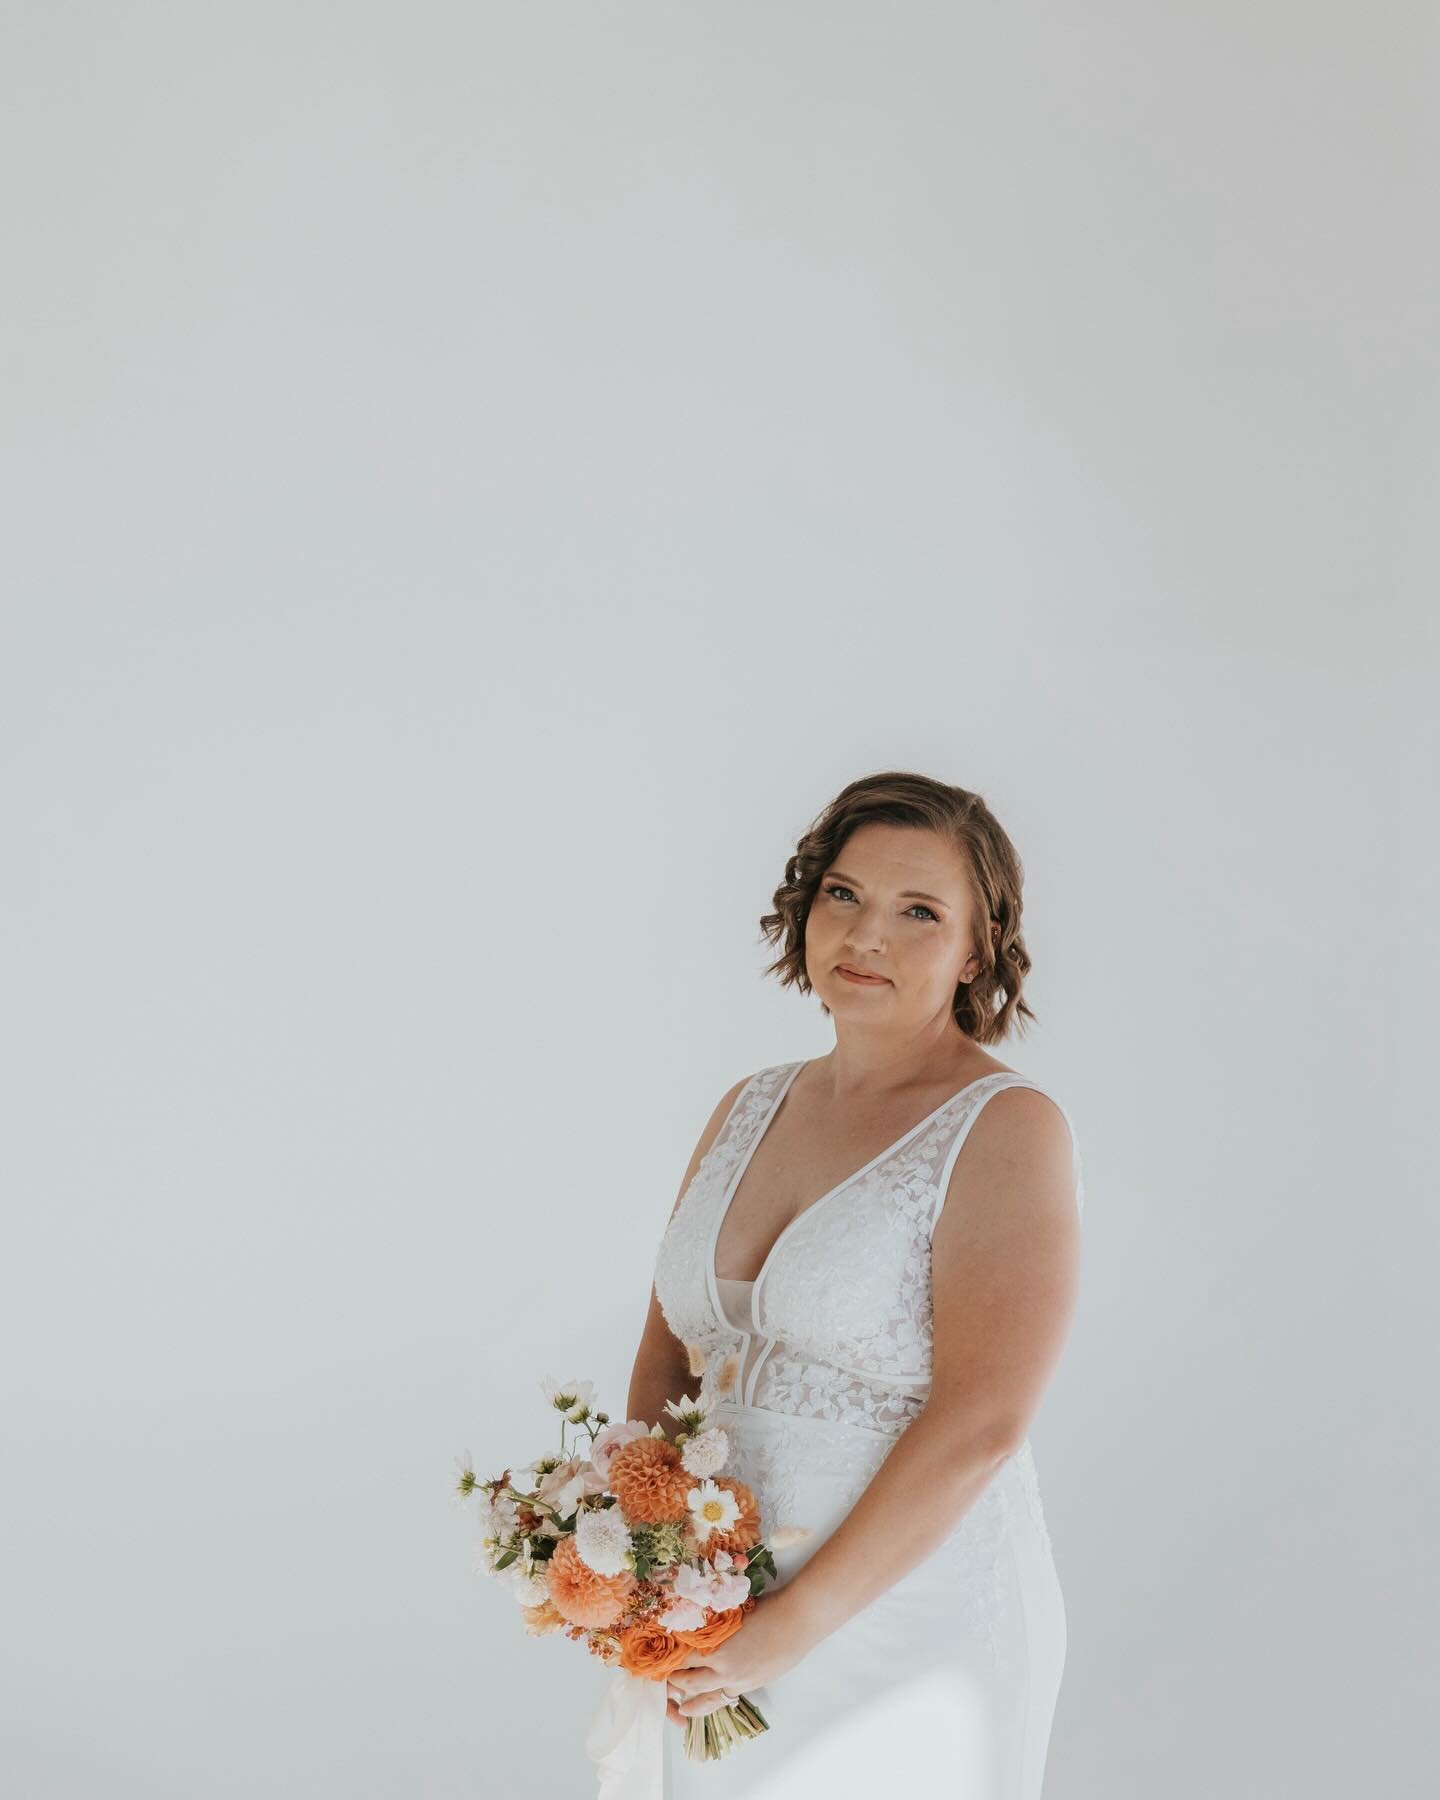 Sometimes you just need some classic studio bridals 🤍

Venue | @realmdenver 
Hair &amp; makeup | @jessica.faye.beauty 
Dress | @vowdweddings 
Bouquet | @wildflowerandwillowfloral